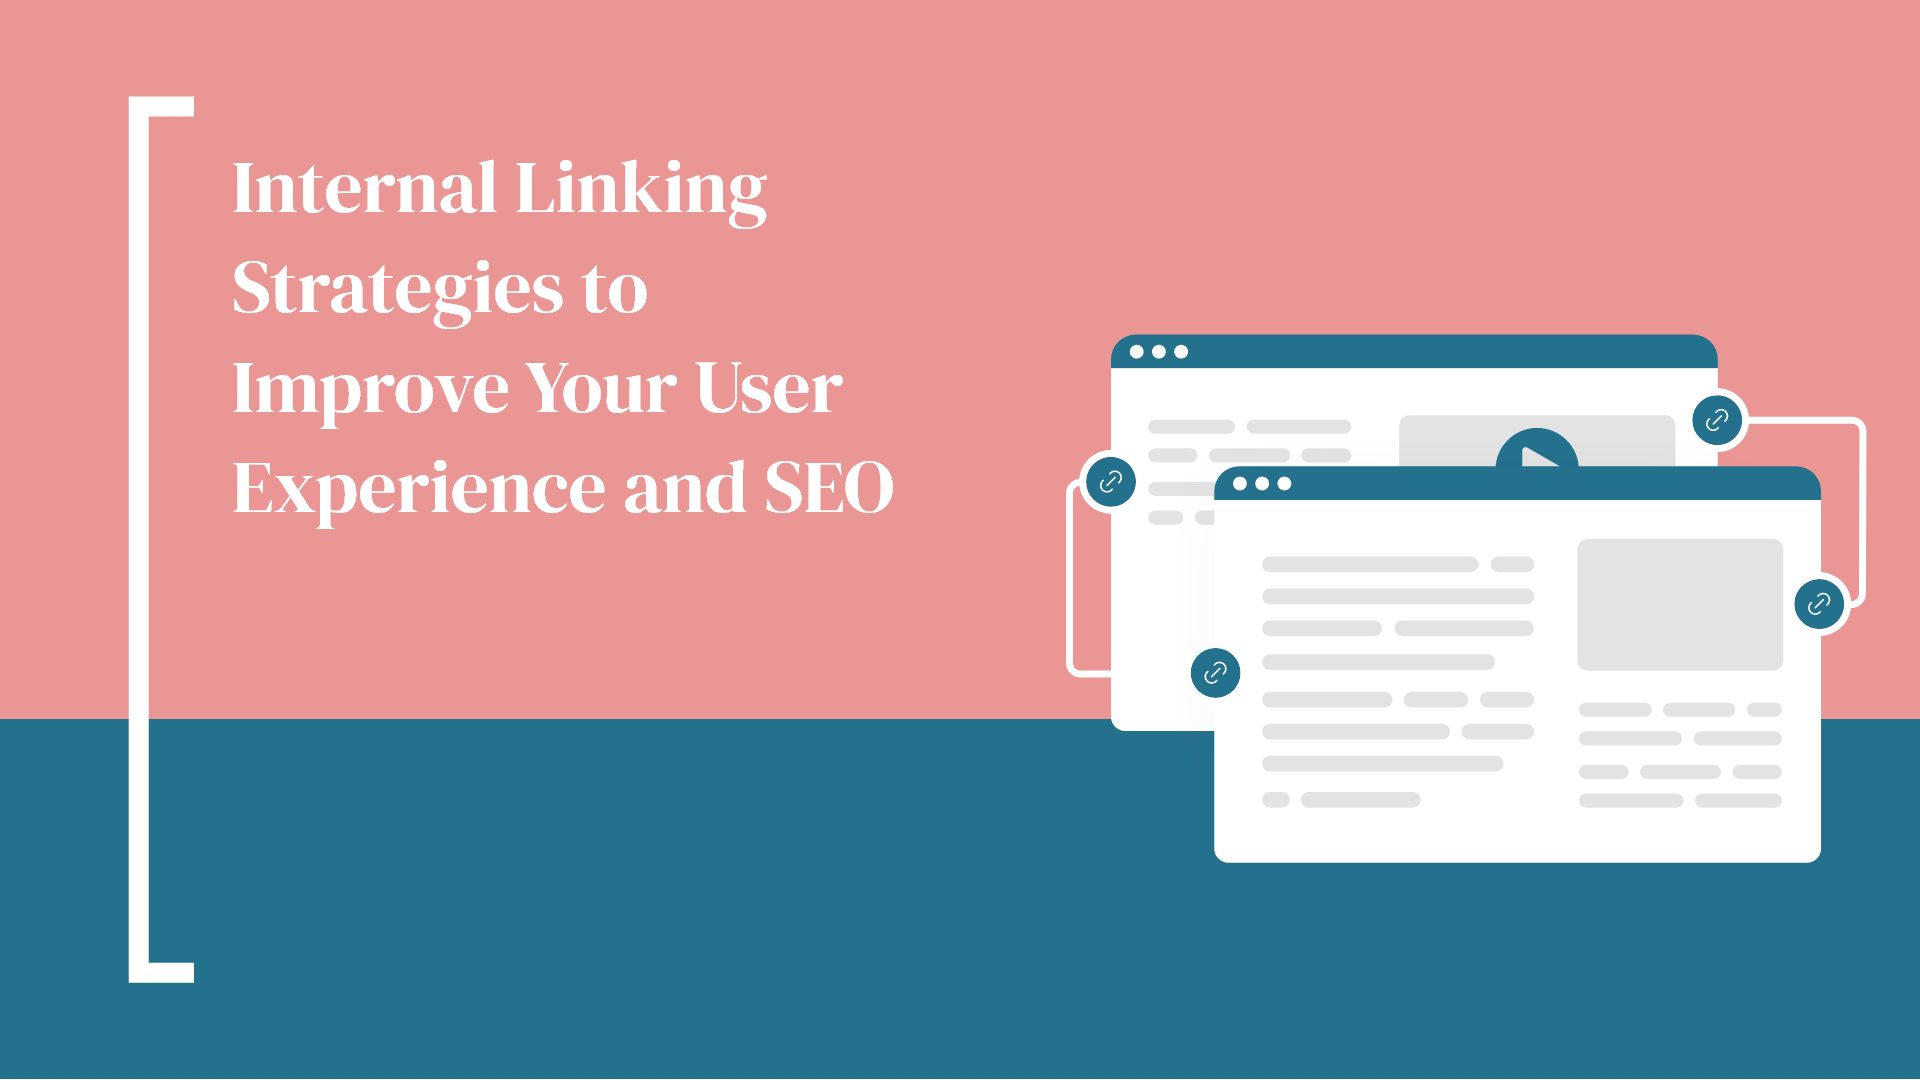 Internal Linking Strategies to Improve Your User Experience and SEO